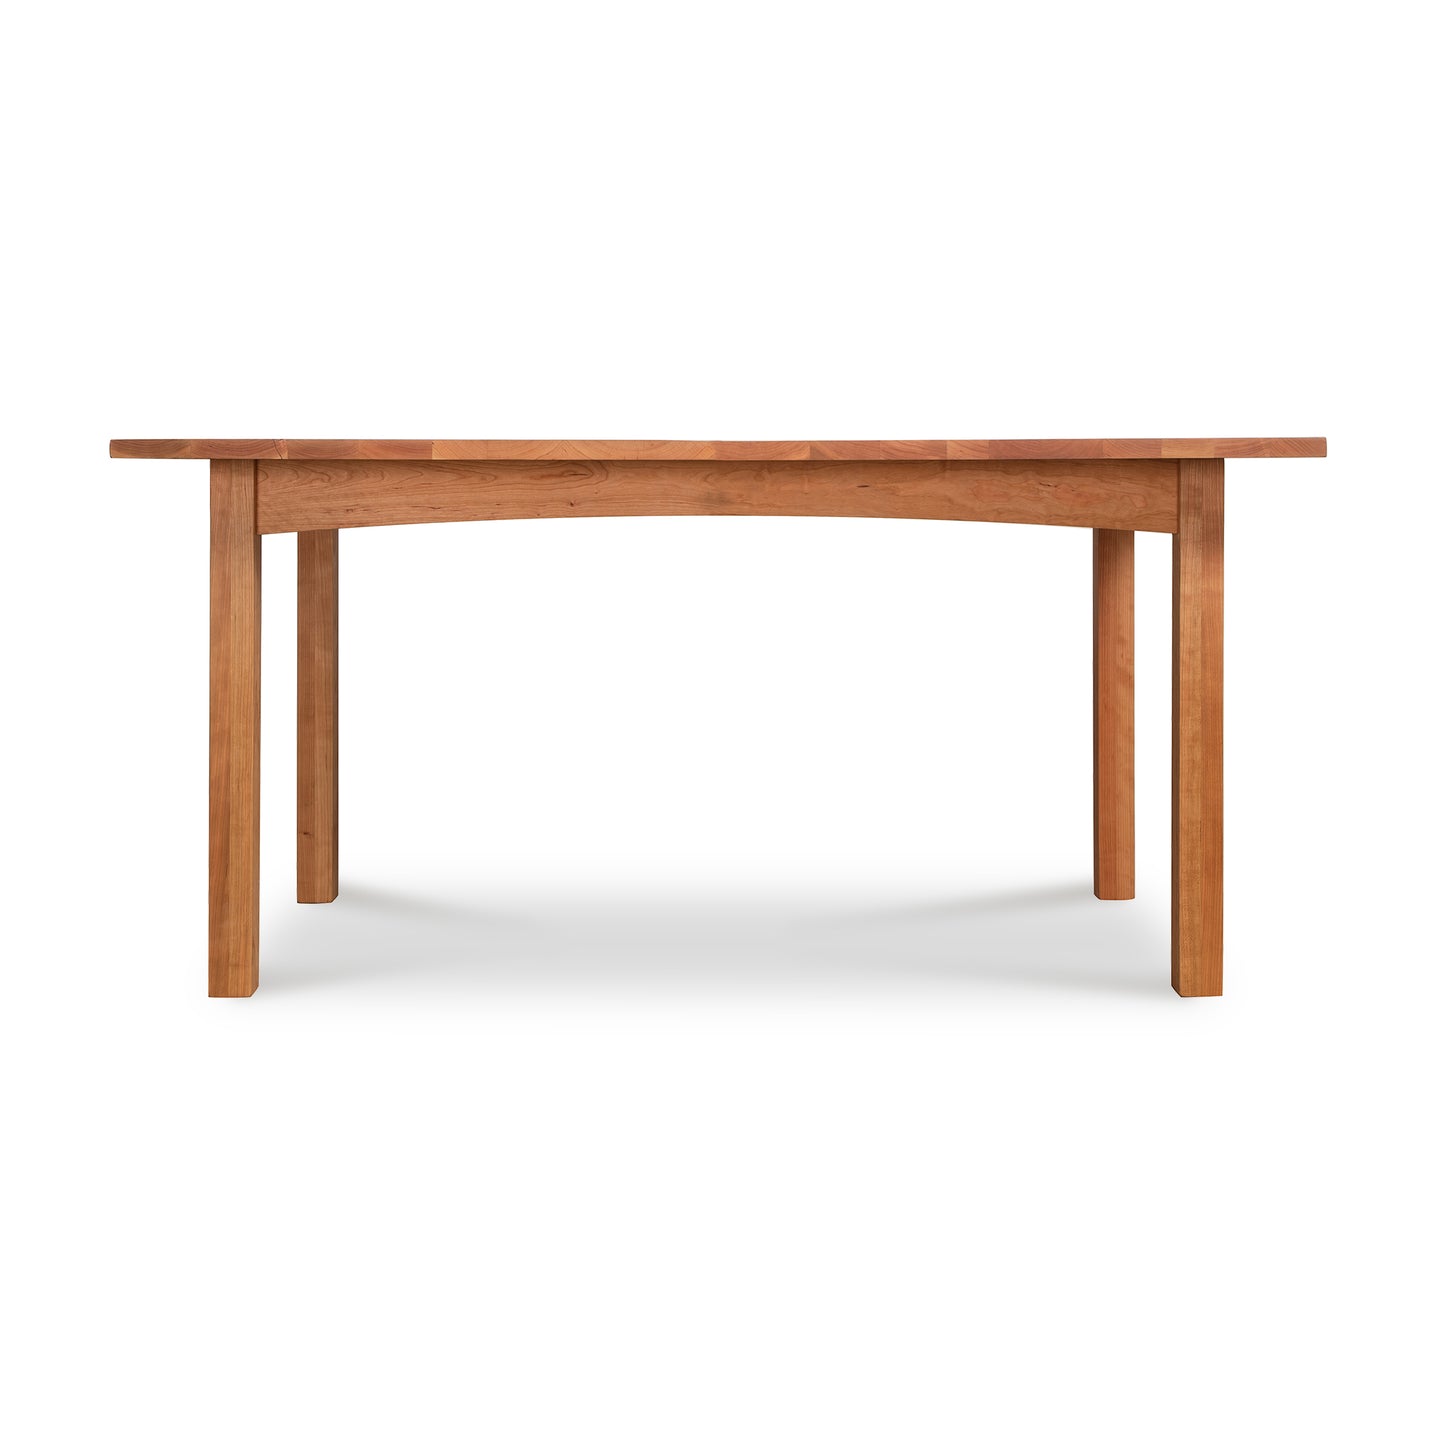 A Burlington Shaker Solid Top Dining Table by Vermont Furniture Designs with four legs on a white background.